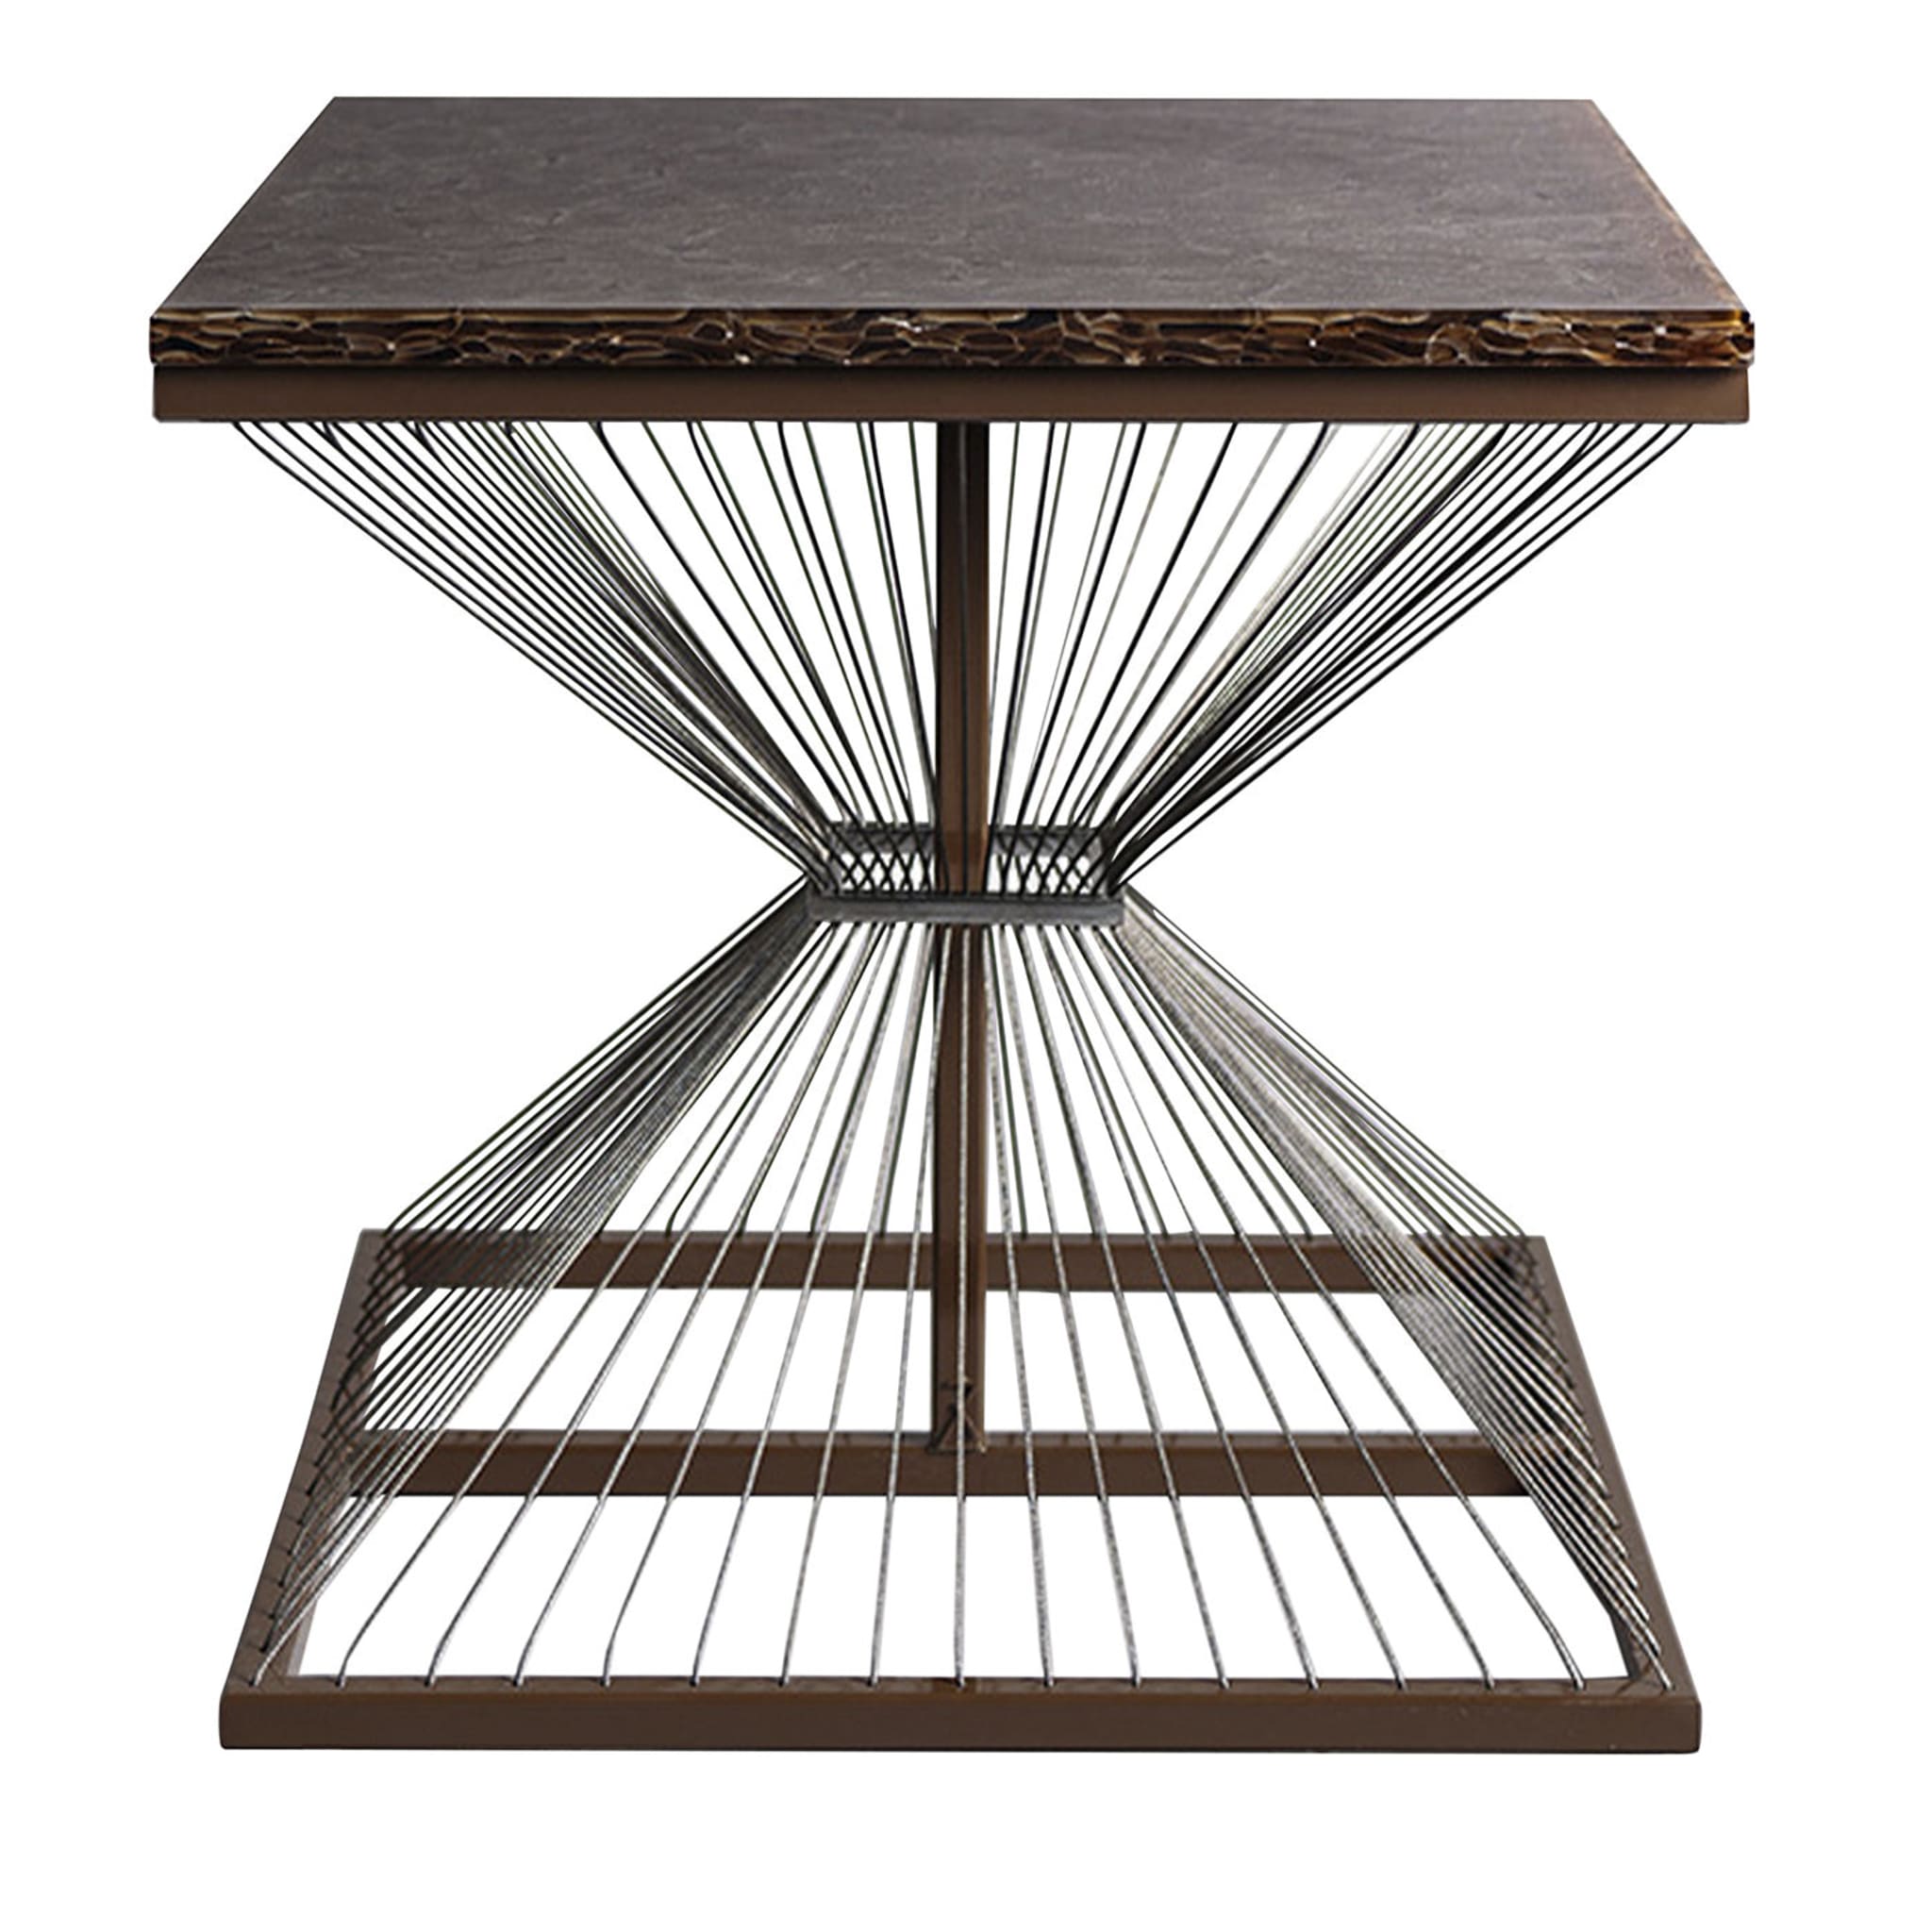 Aegis Square Side Table by Ziad Alonaizy - Main view